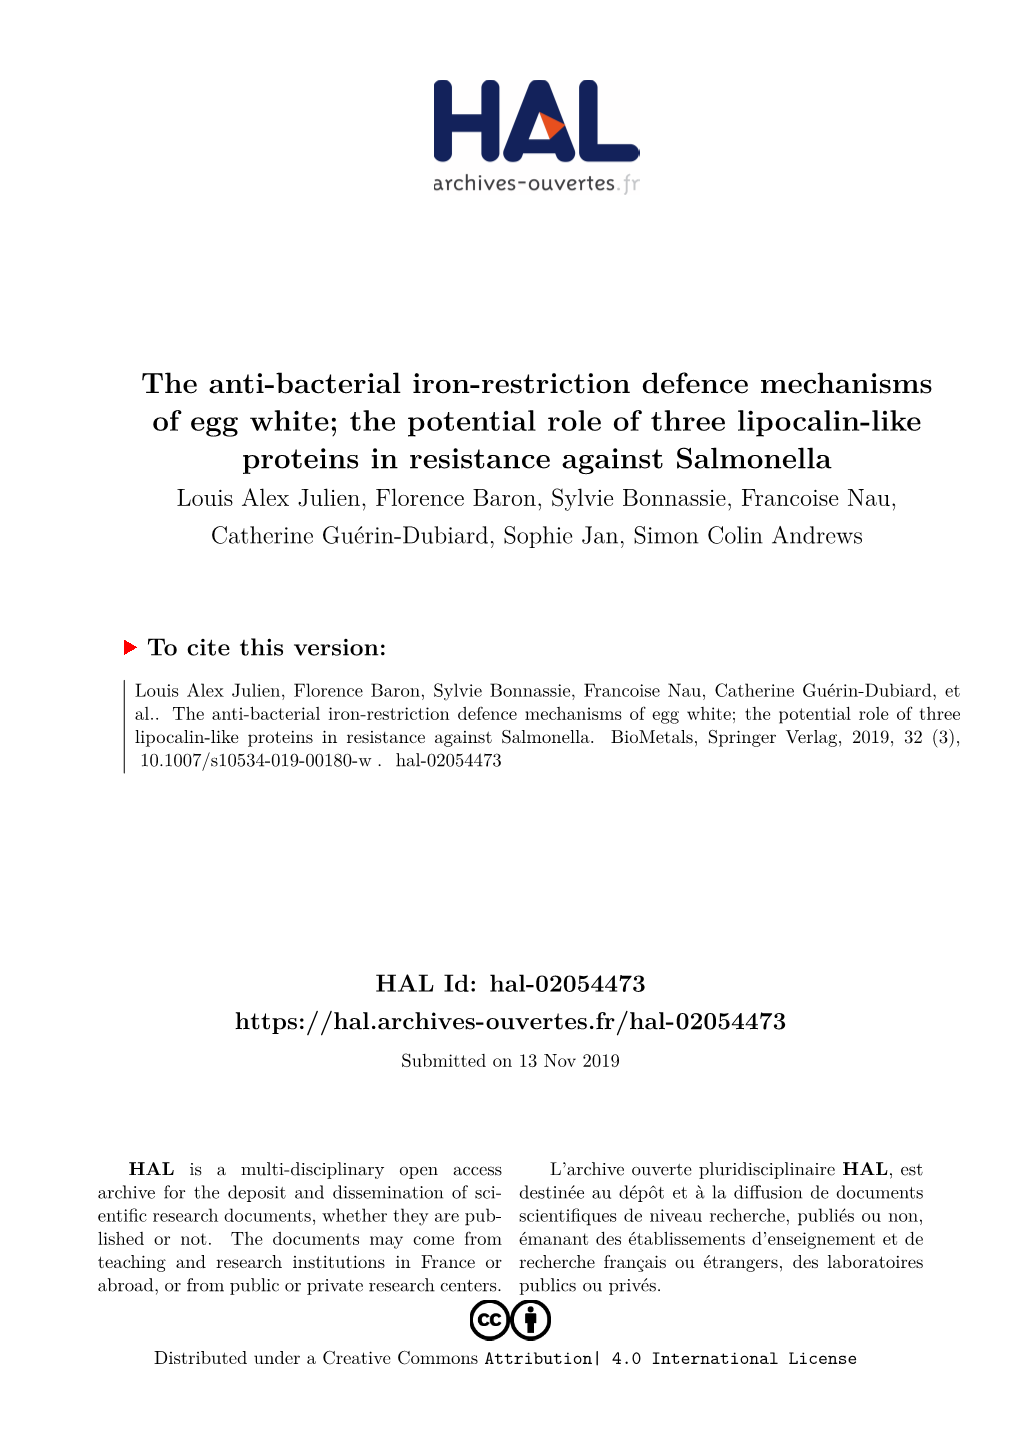 The Anti-Bacterial Iron-Restriction Defence Mechanisms of Egg White